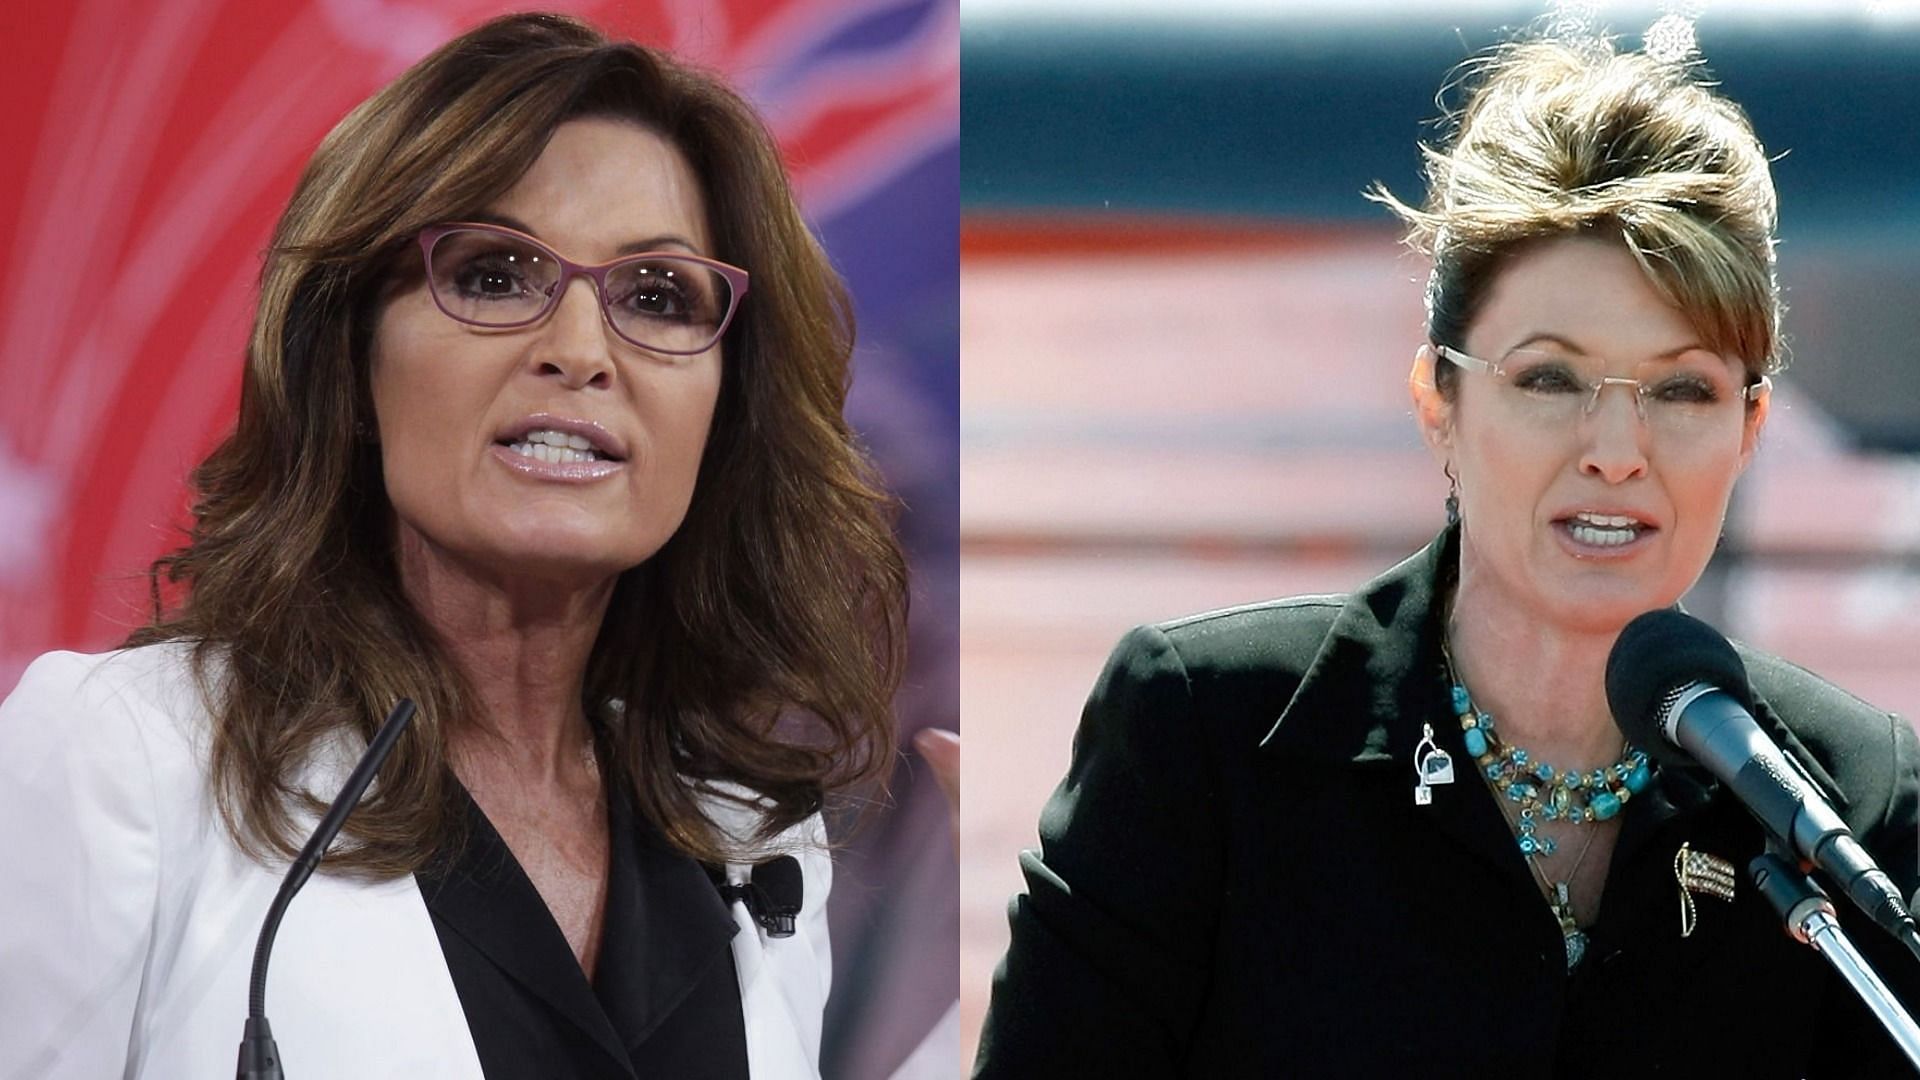 Former Alaska Governor Sarah Palin is set to run for Congress marking her return to politics (Image via Alex Wong/Getty Images and Ethan Miller/Getty Images)